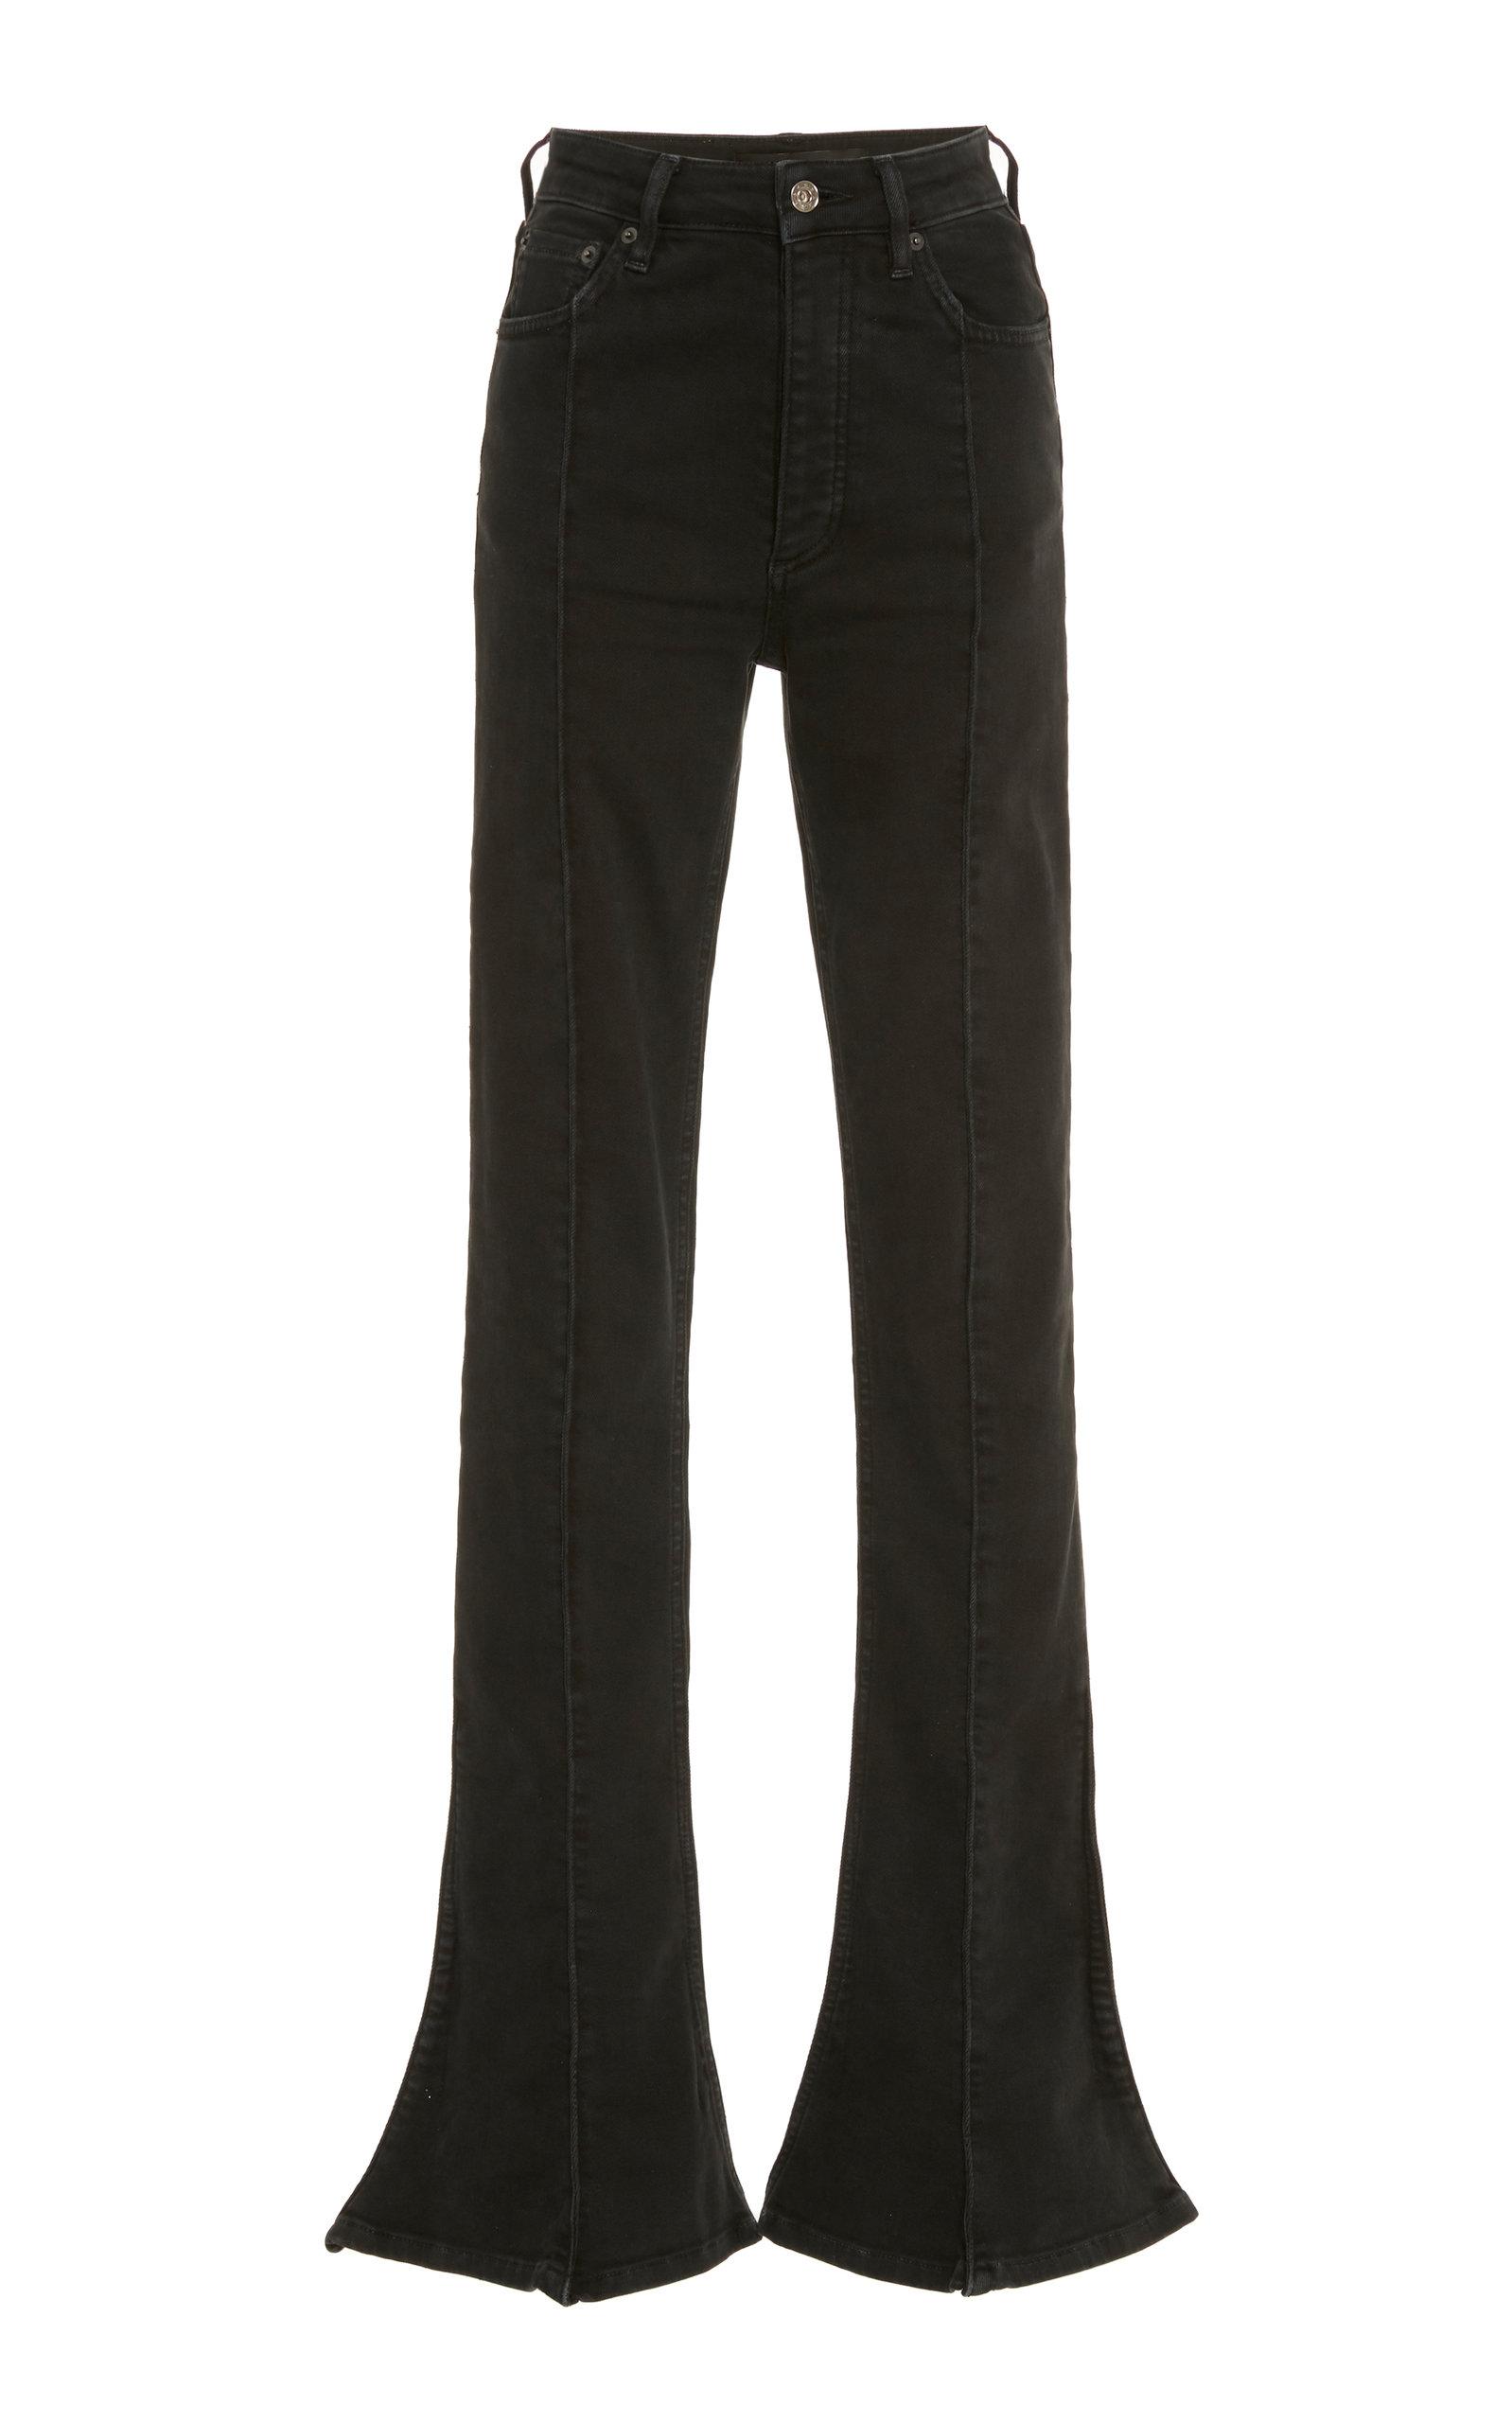 Y. Project Denim High-rise Stretch Trumpet Jeans in Black - Lyst